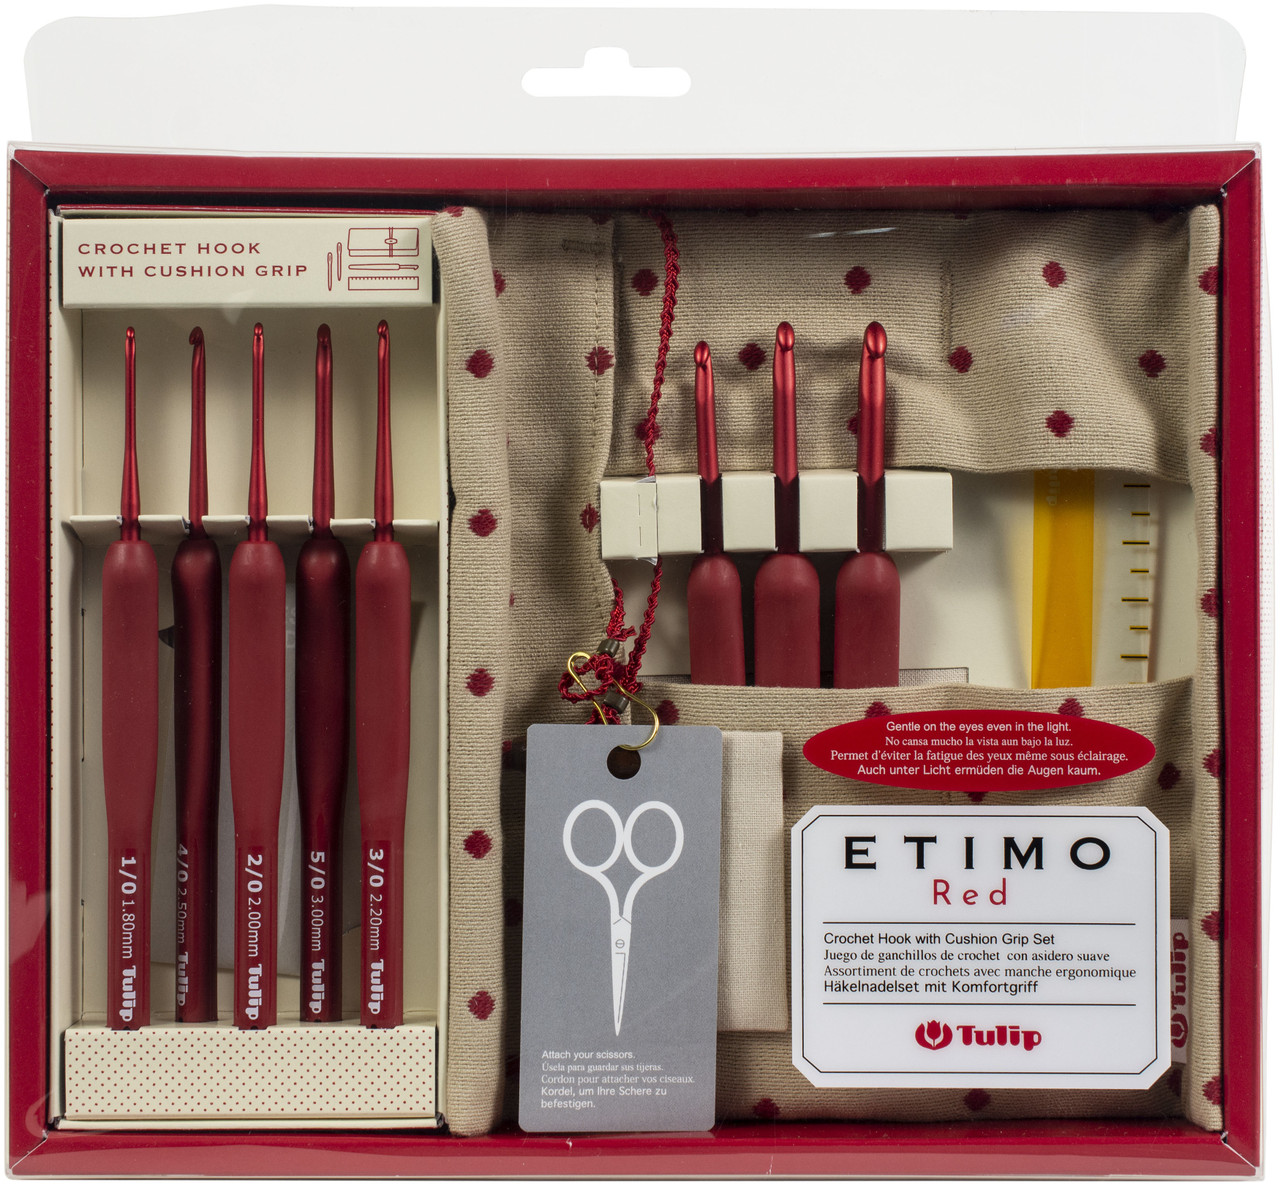  Tulip Etimo Red Crochet Hook with Cushion Grip Set (TED-001e)